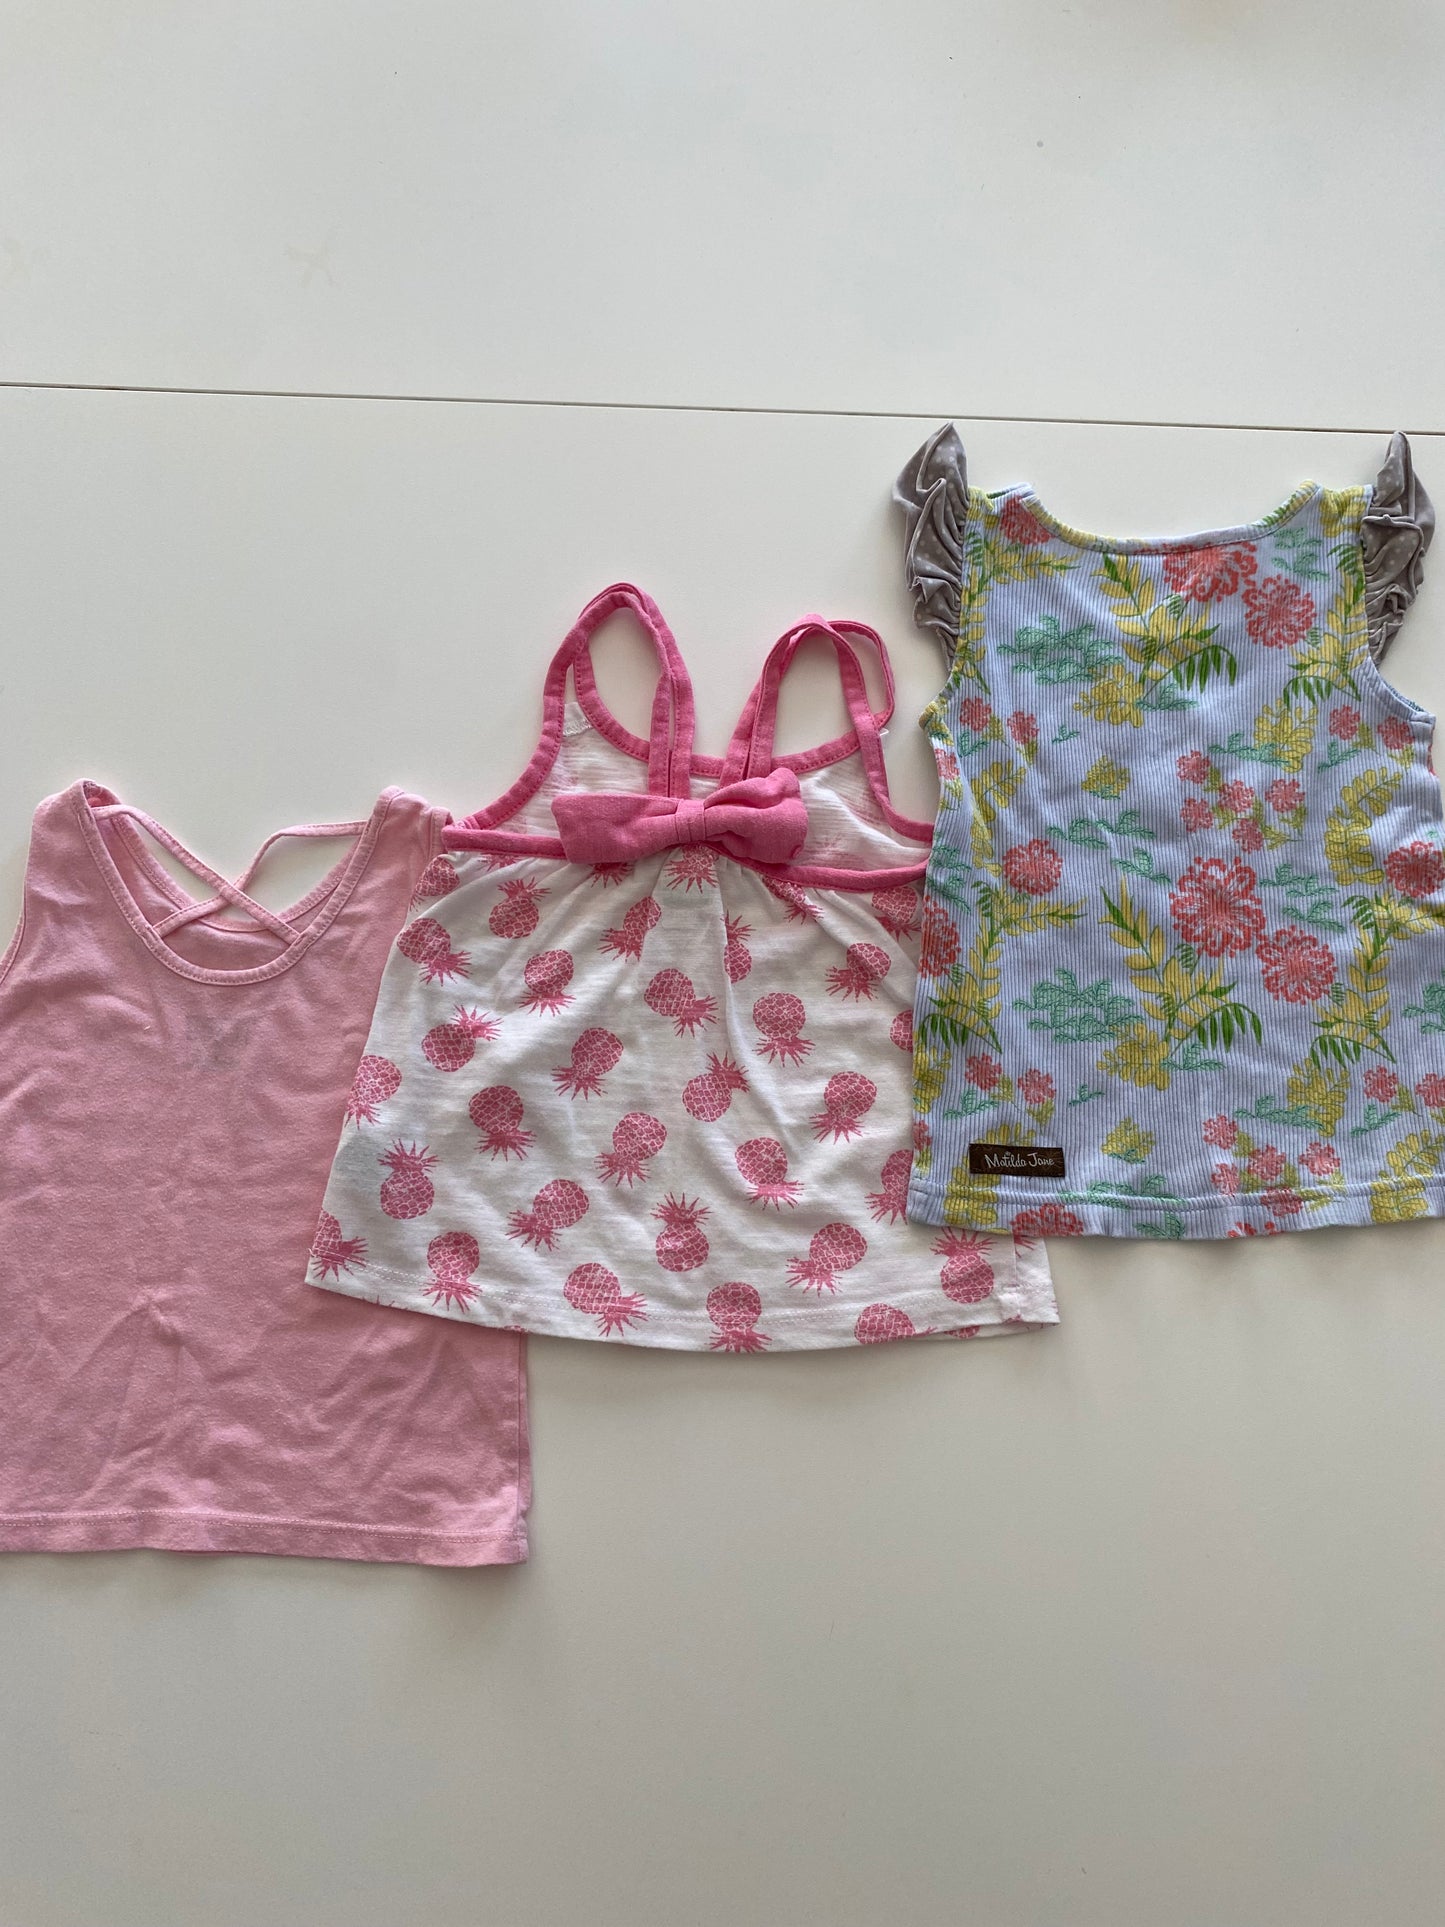 Matilda Jane blue floral tank and Children’s Place pink tank and Old Navy white with pink pineapple tank bundle